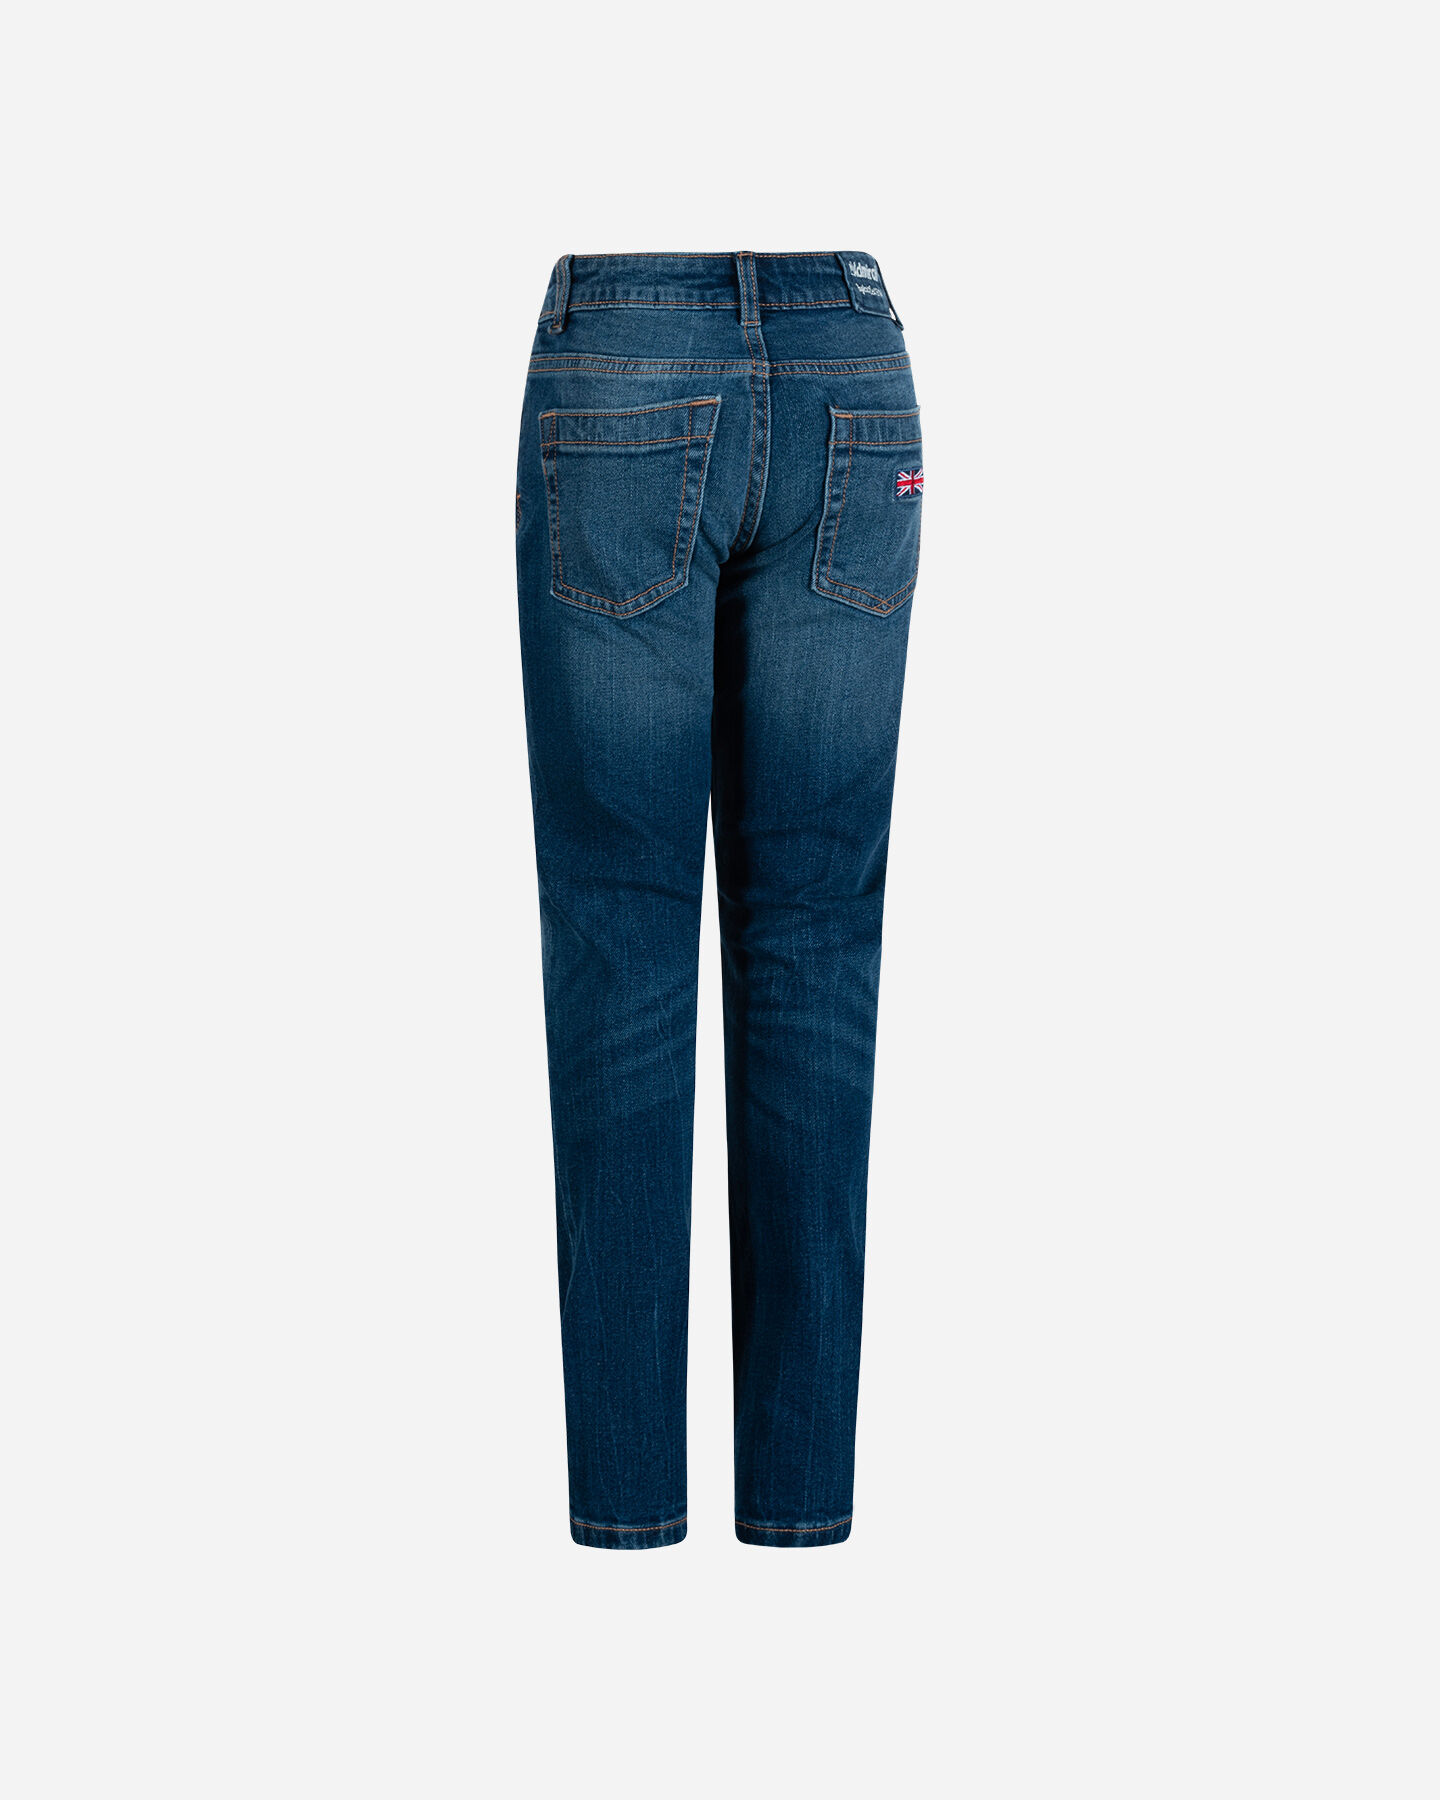  Jeans ADMIRAL COLLEGE BTS JR S4125681|MD|10A scatto 1